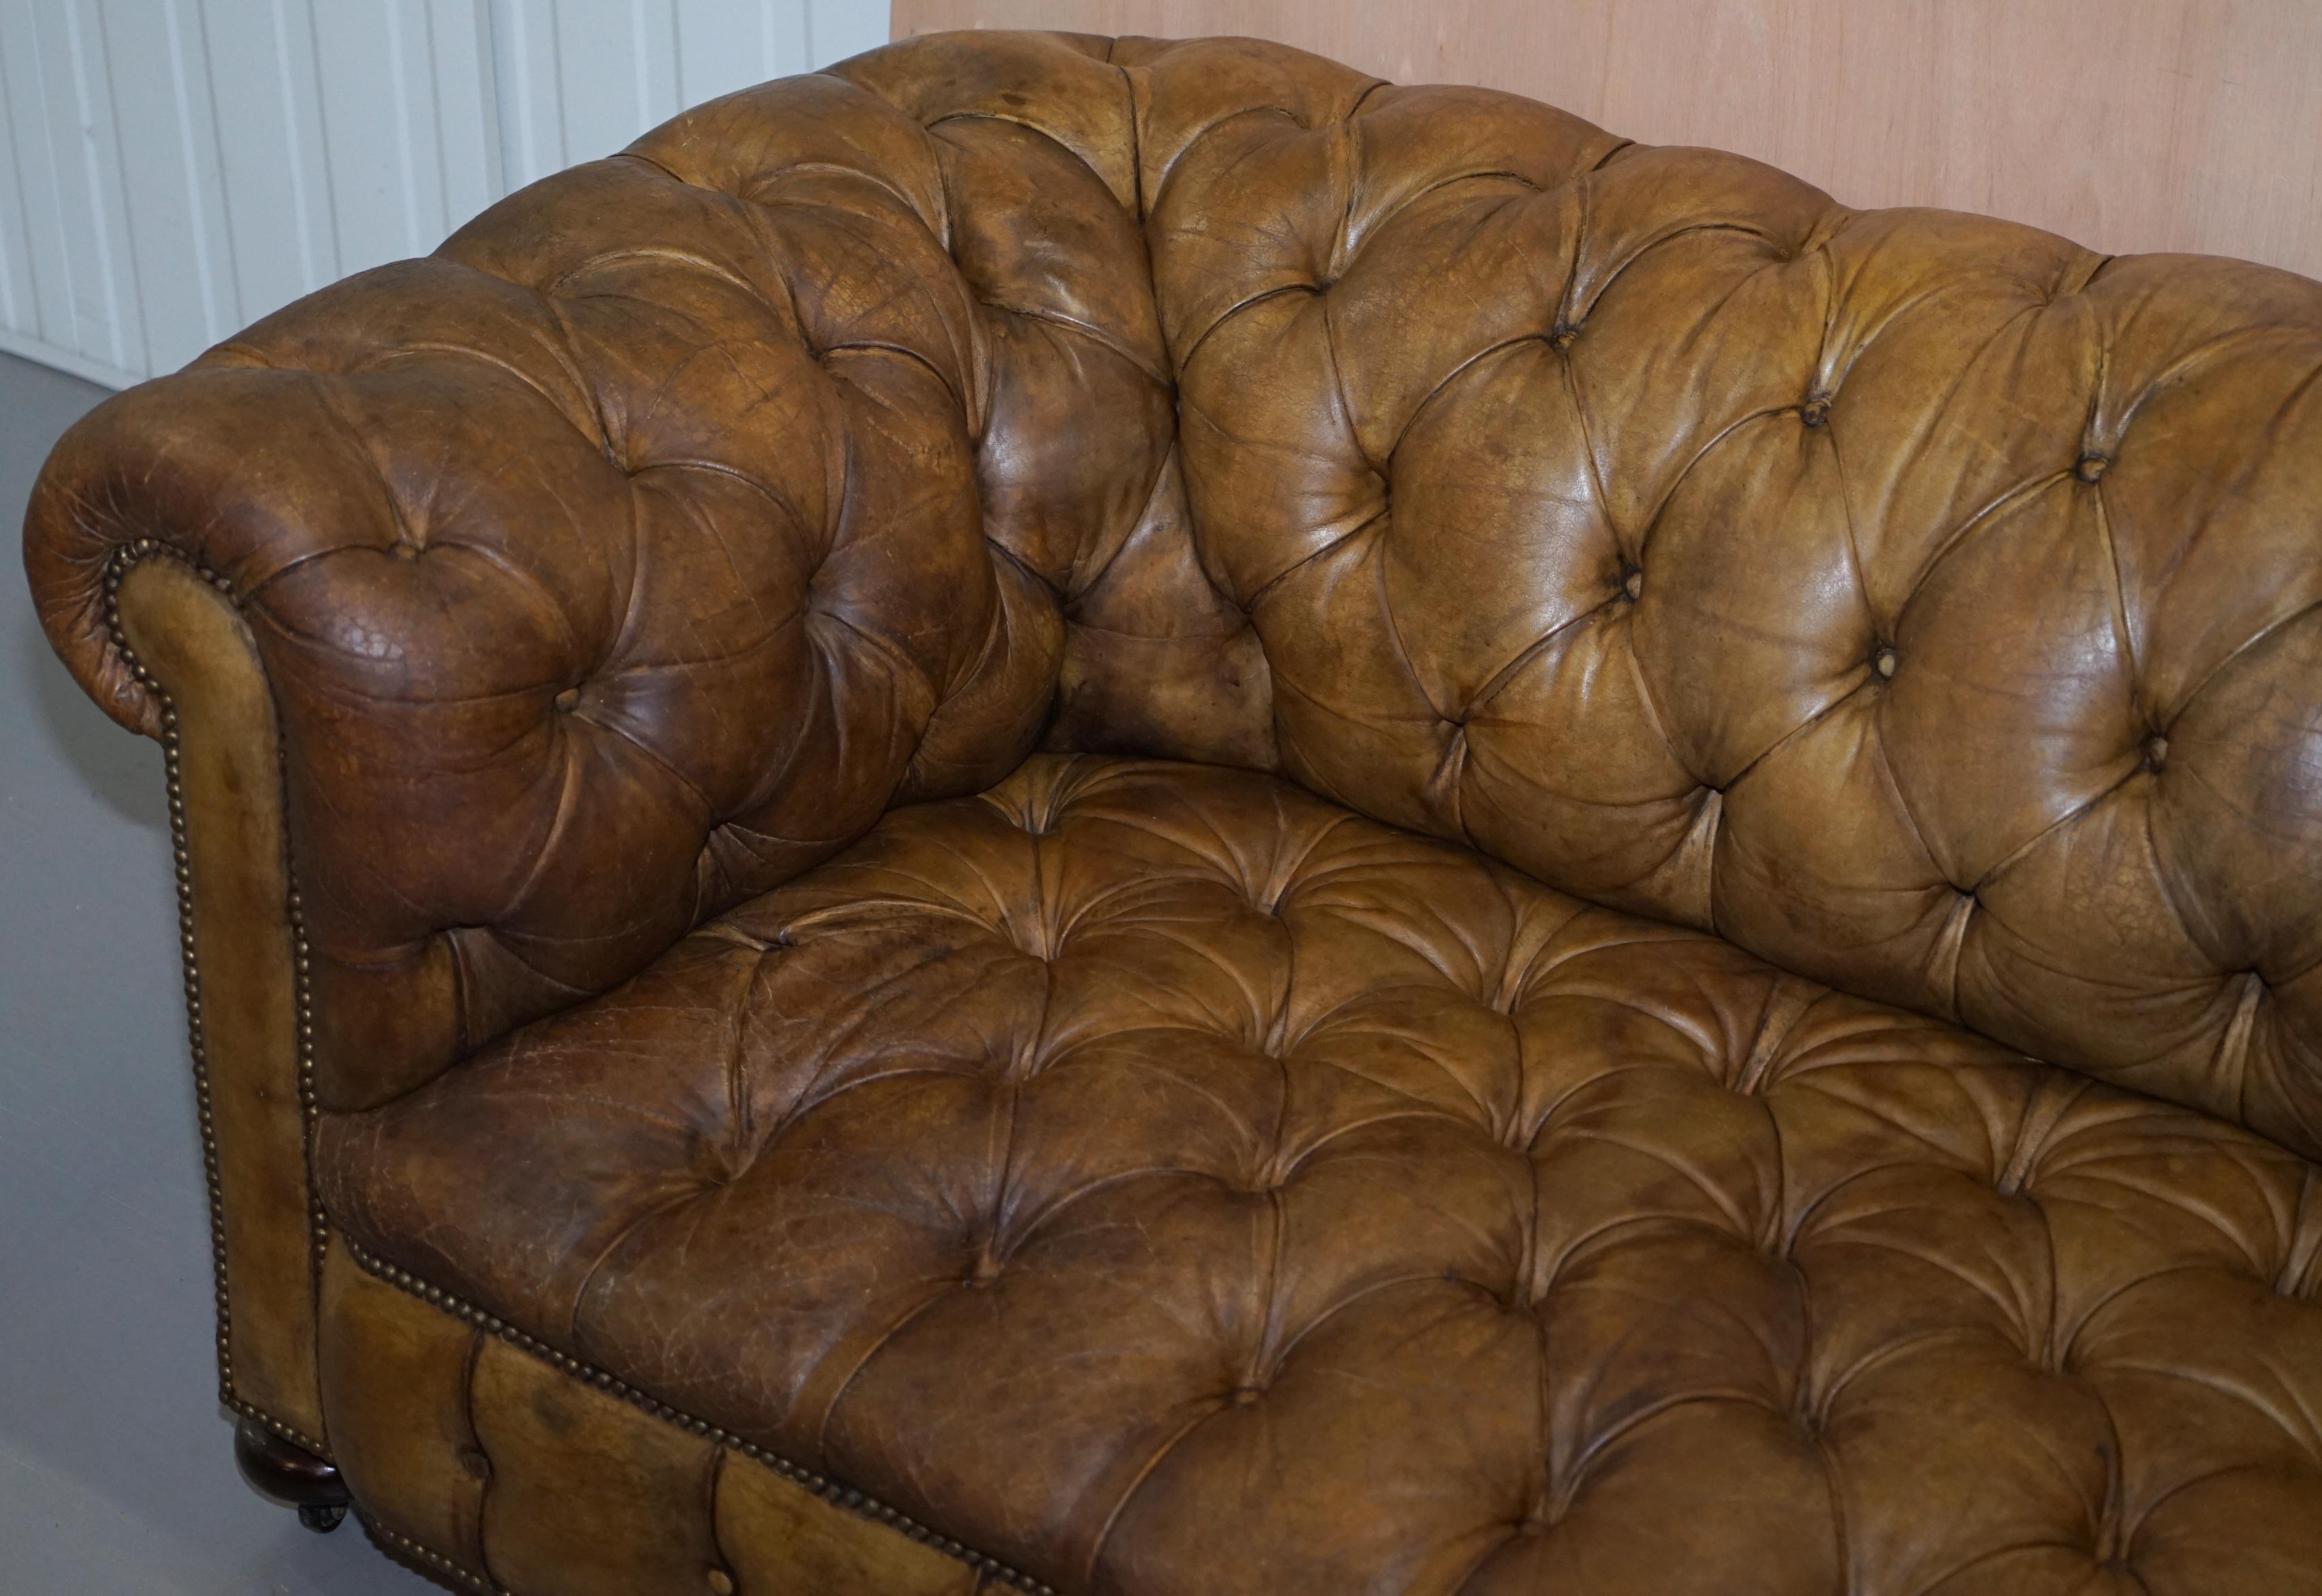 English Rare circa 1900 Fully Buttoned Chesterfield Sofa Original Leather Upholstery